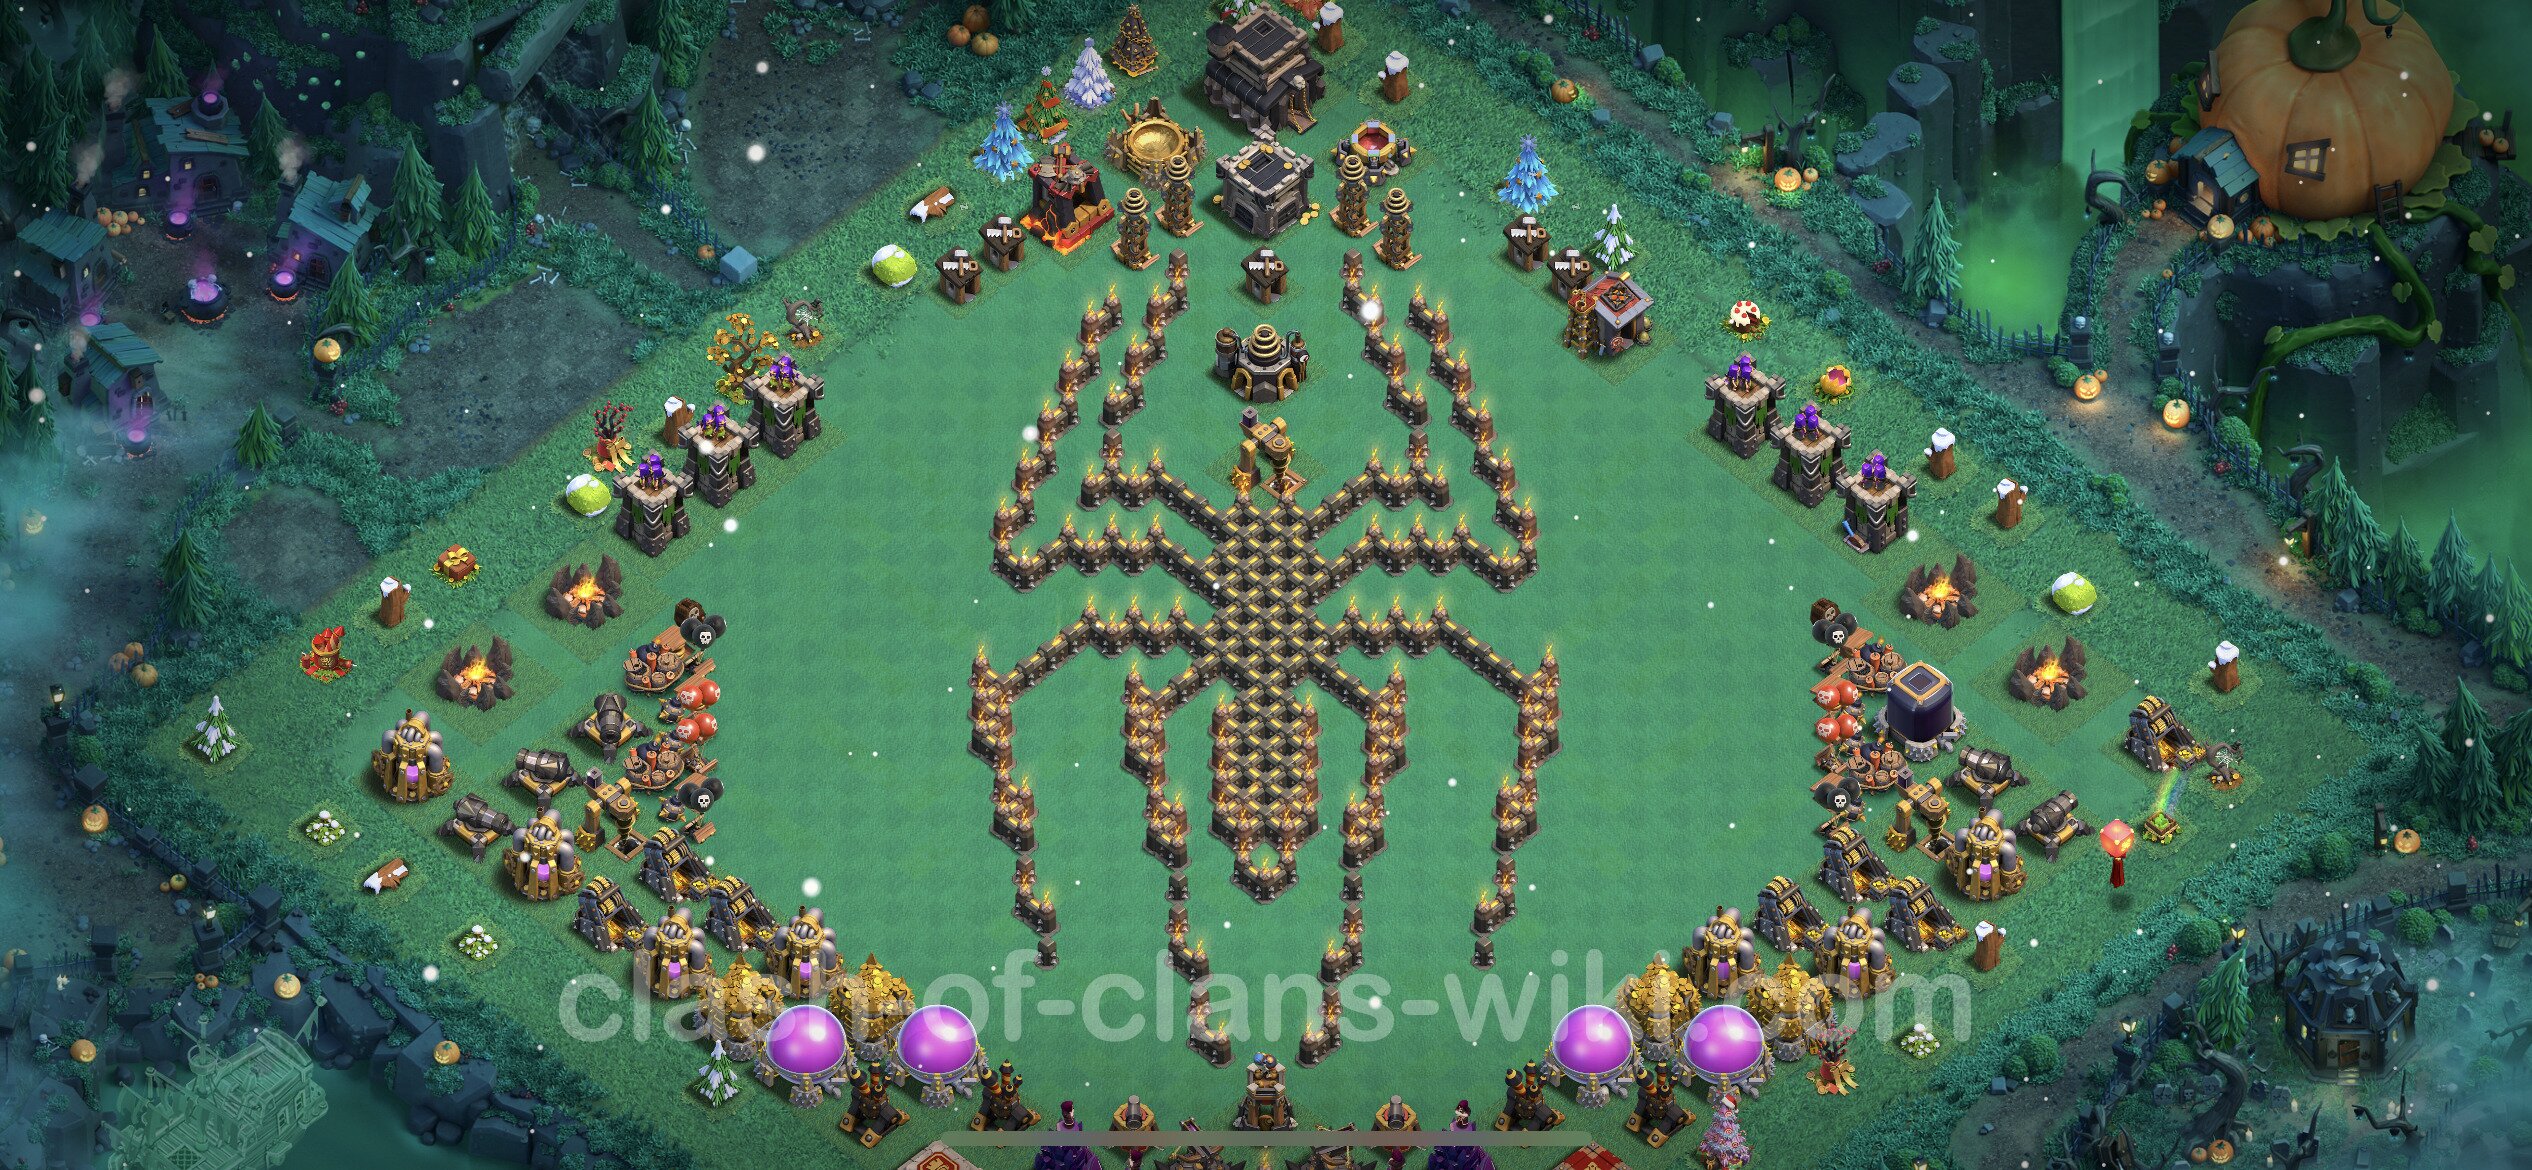 Funny Troll Base TH9 with Link - Town Hall Level 9 Art Base Copy, #8